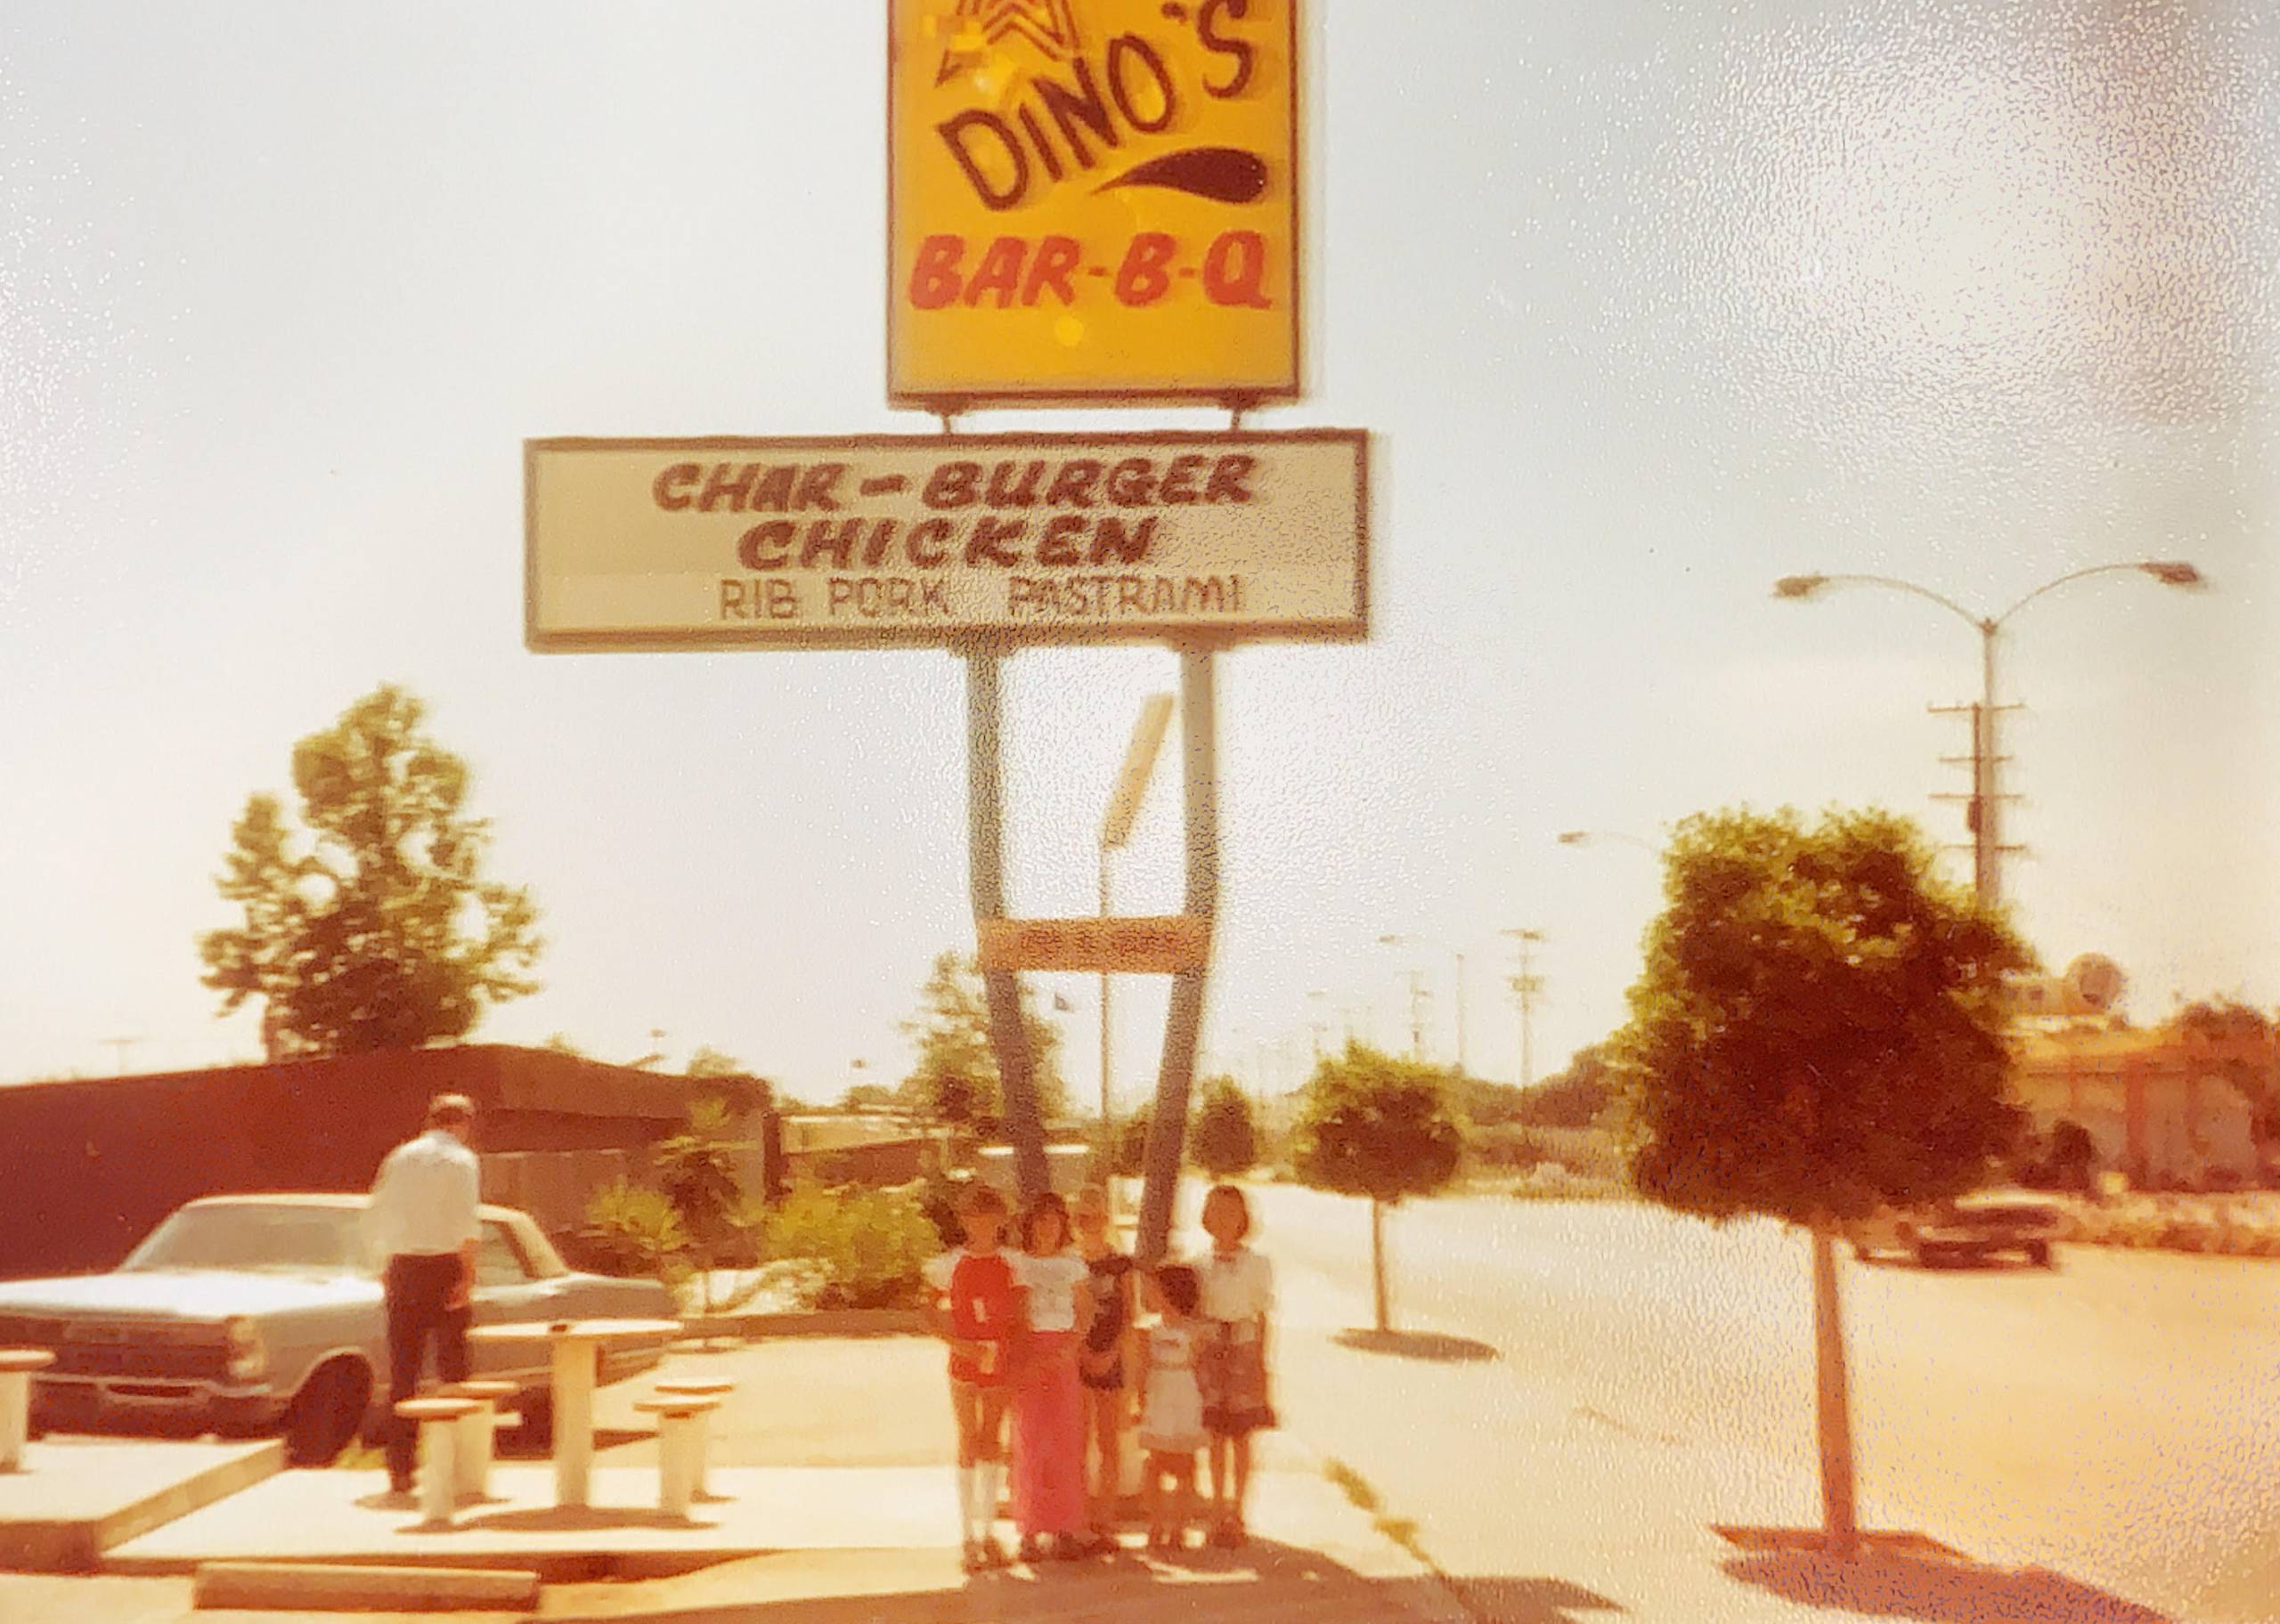 Blurry photograph of five people standing in front of a Dino's Bar-B-Q sign.